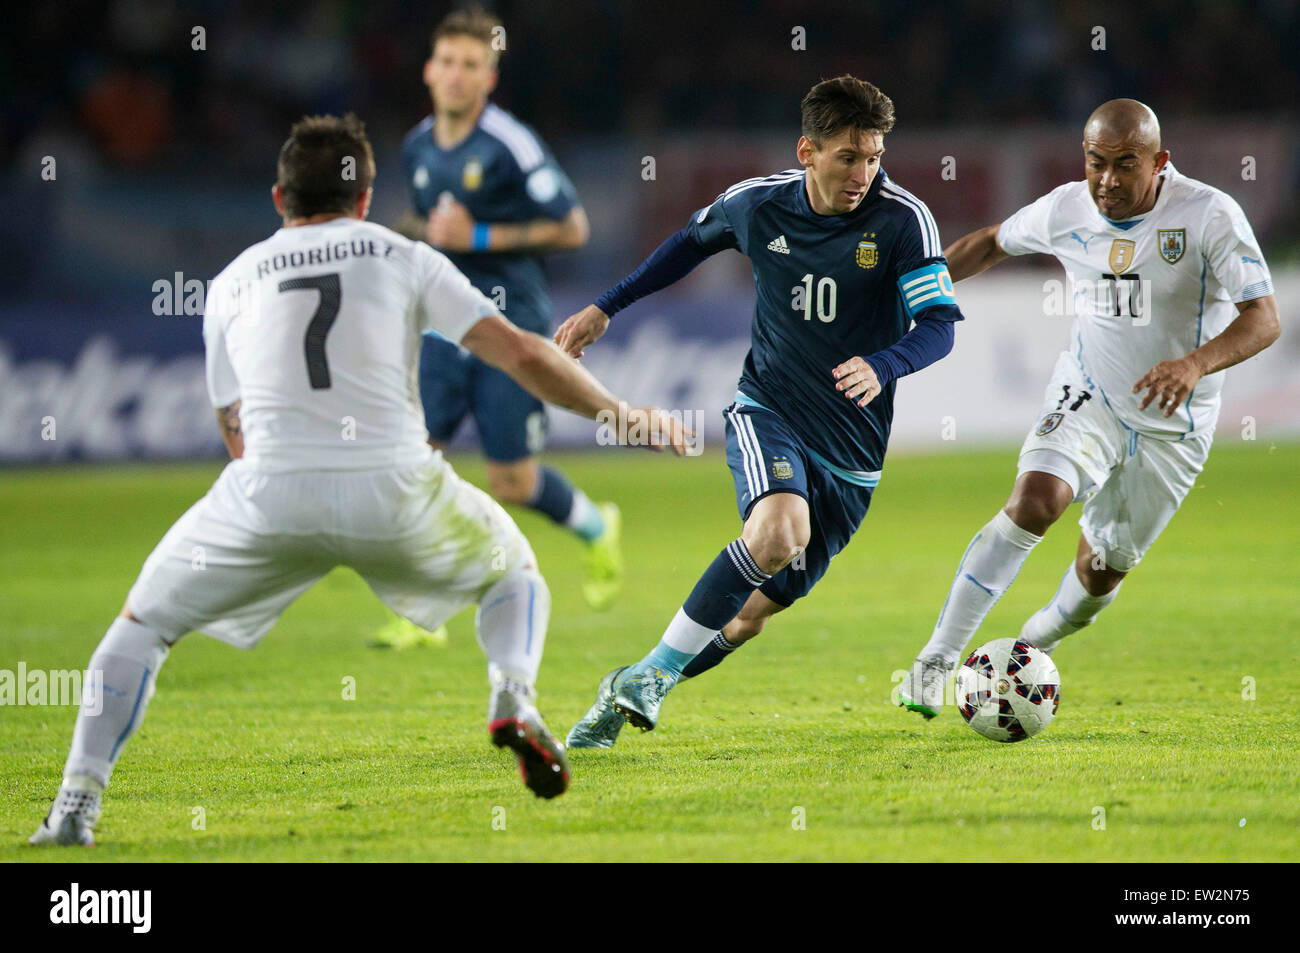 La Serena, Chile. 16th June, 2015. Lionel Messi (C) of Argentina vies for the ball with Cristian Rodriguez (L) and Egidio Arevalo of Uruguay during the Group B match at the 2015 American Cup, at La Portada stadium, in La Serena, Chile, on June 16, 2015. Argentina won 1-0. Credit:  Luis Echeverria/Xinhua/Alamy Live News Stock Photo